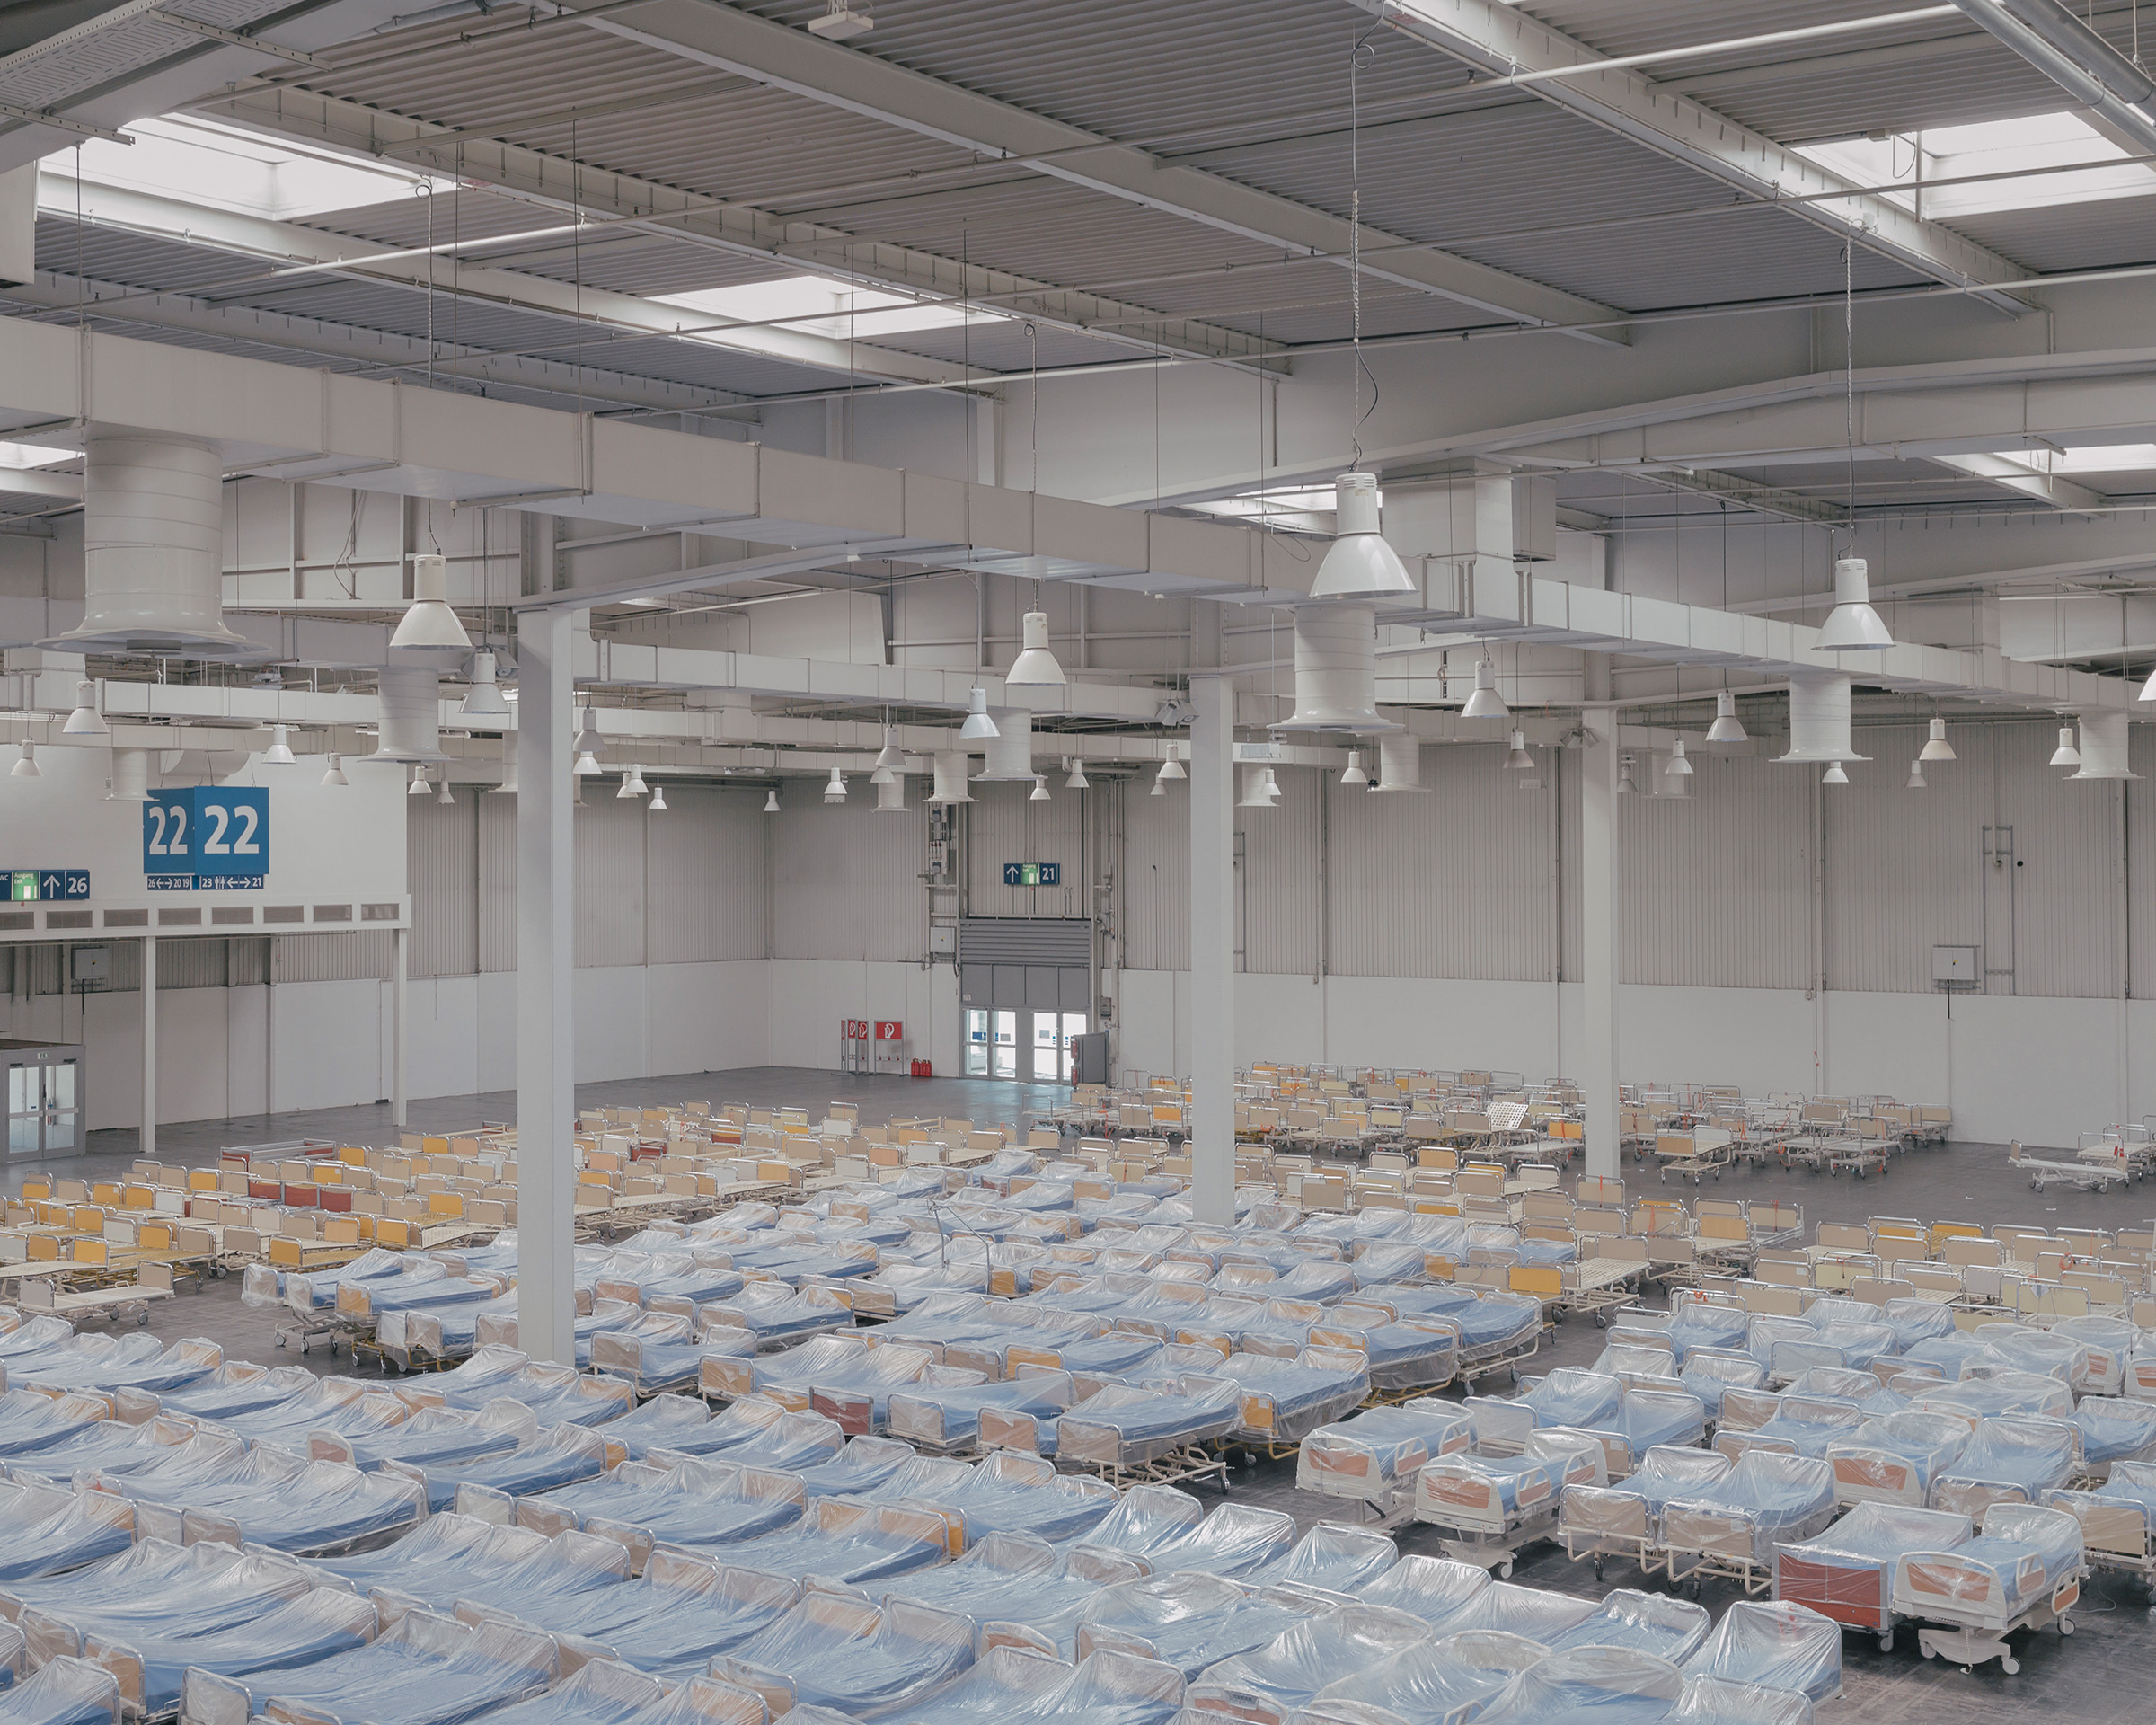 Hospital beds are set up on April 4 at a new hospital for treating coronavirus in an exhibition hall at the Hannover Messe trade fair in Hannover.